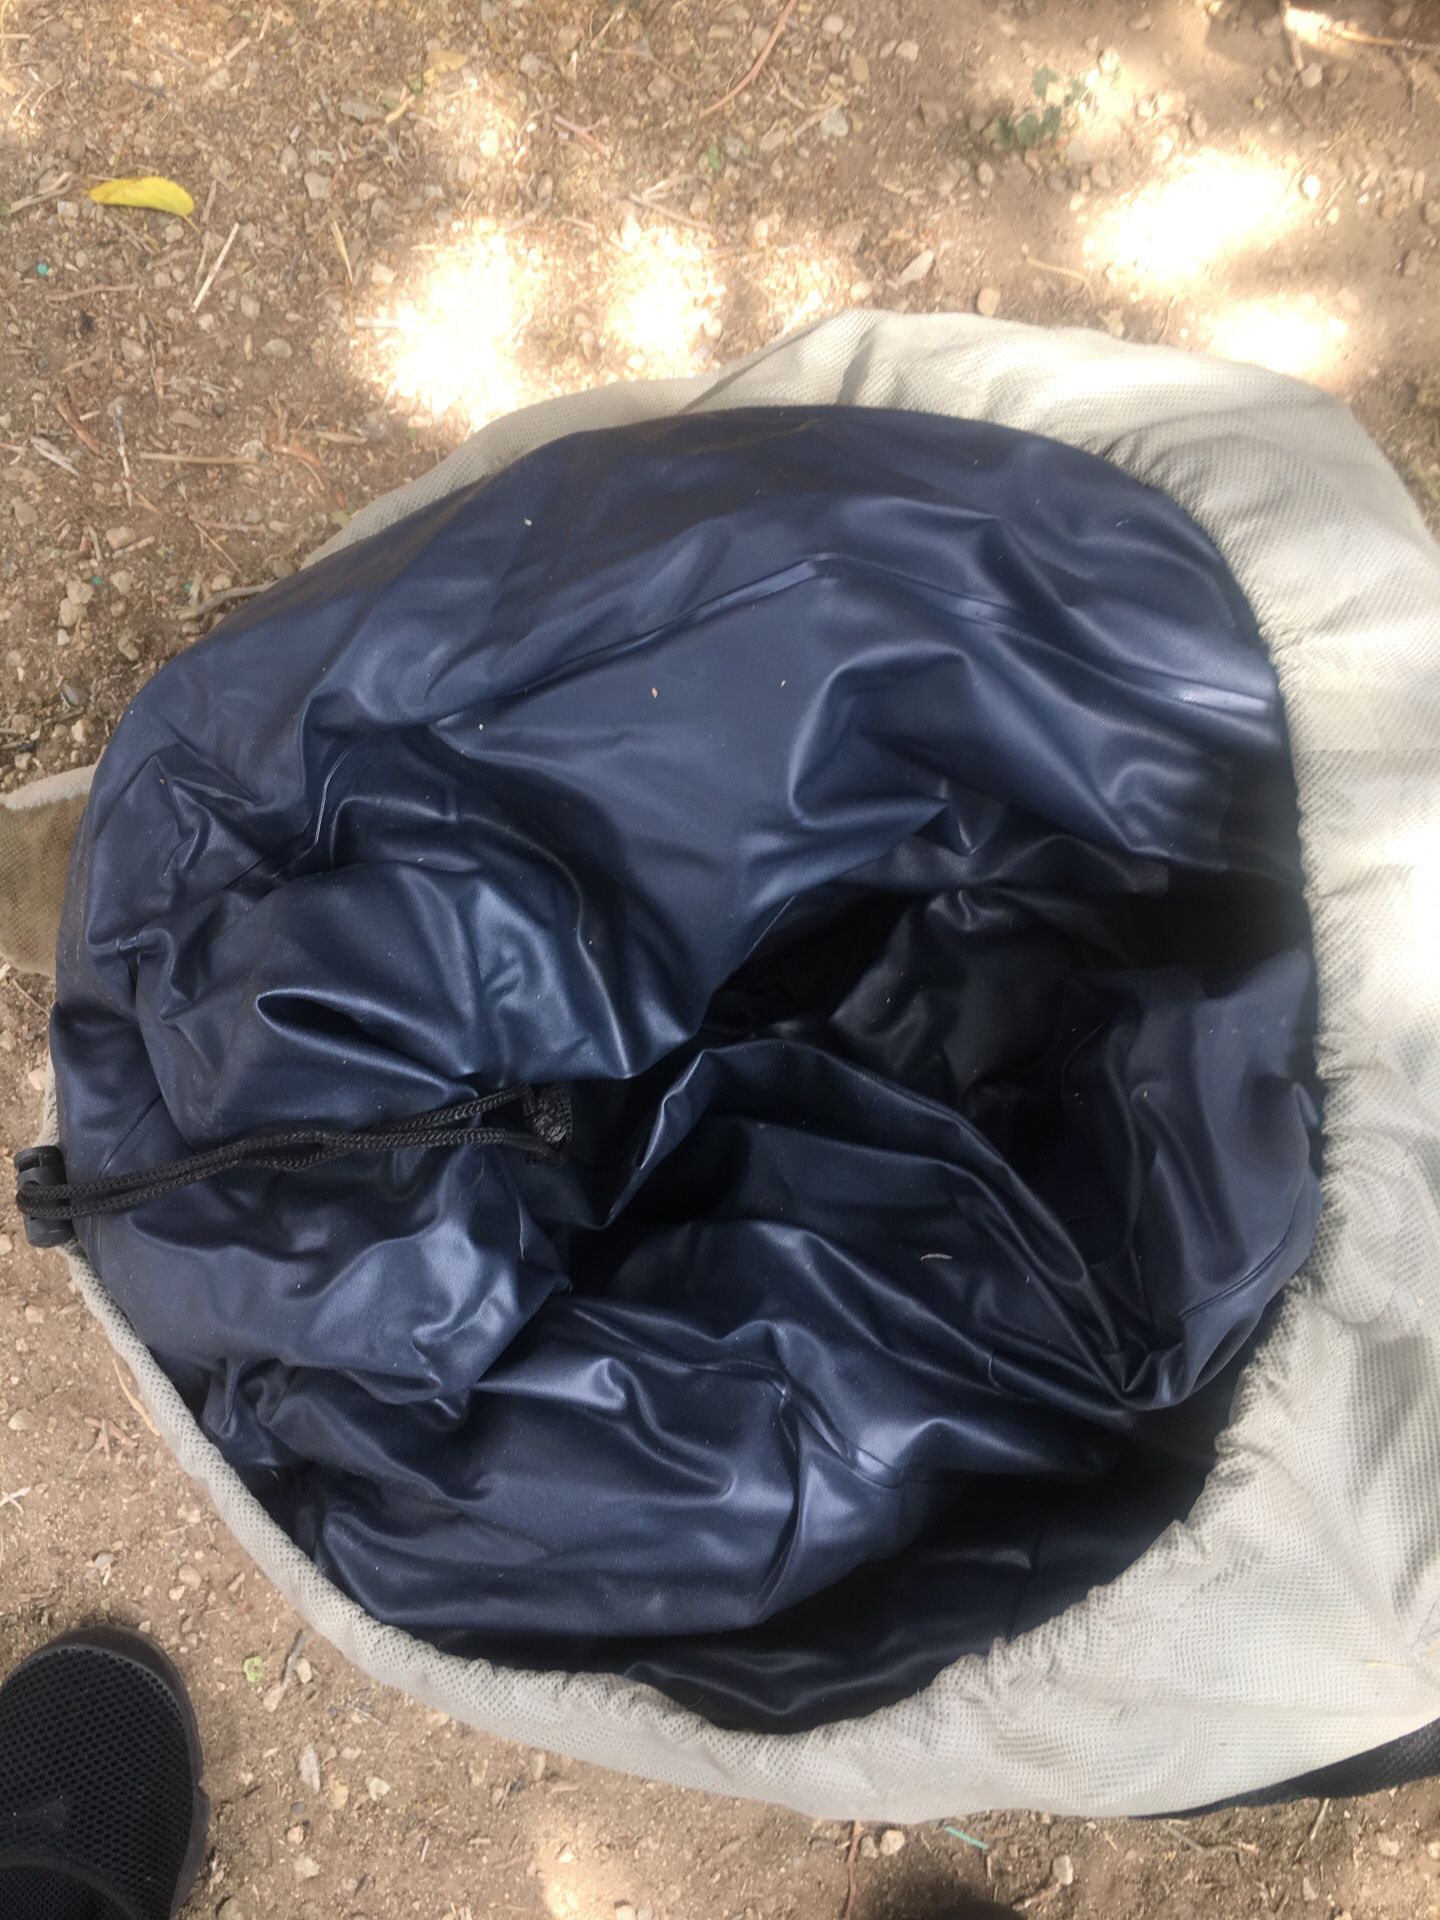 Two Air Mattresses- barely used